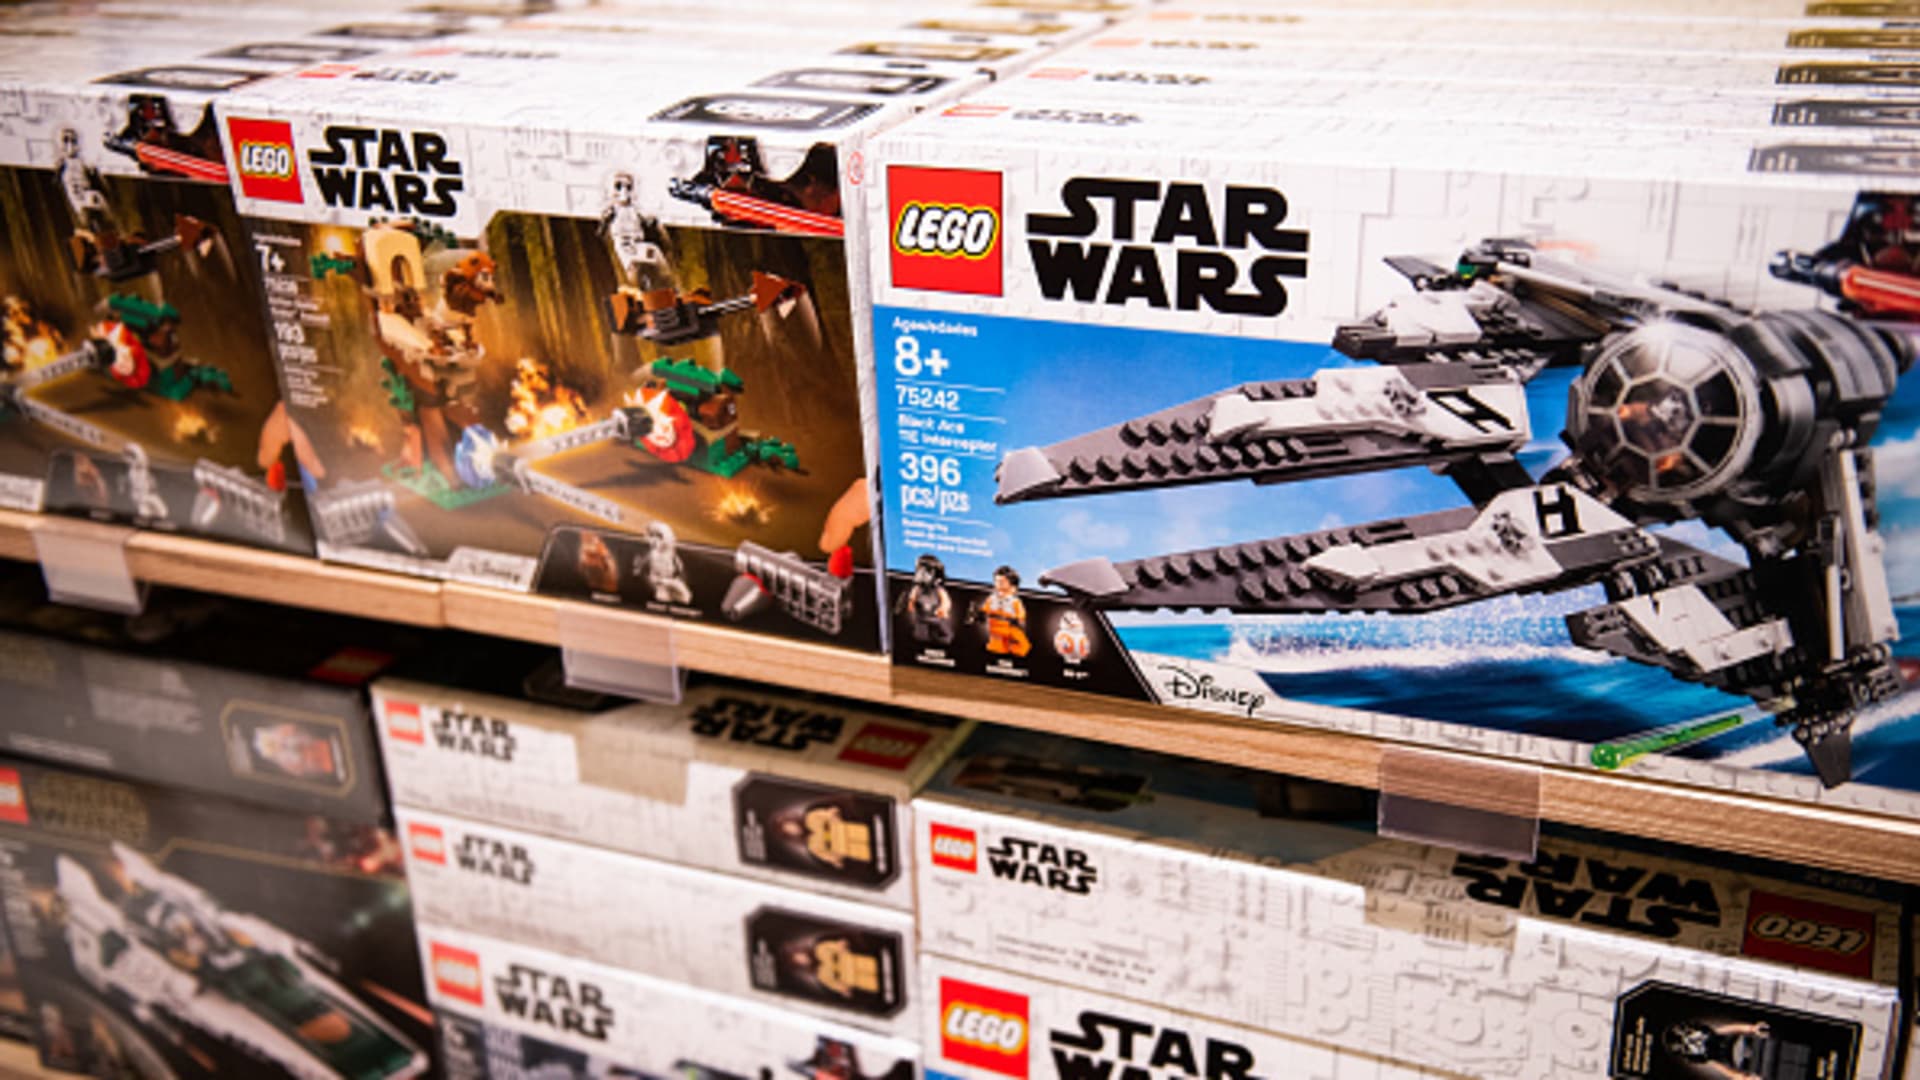 Lego sales jump 17% in first half of 2022, boosted by Star Wars and Harry Potter sets